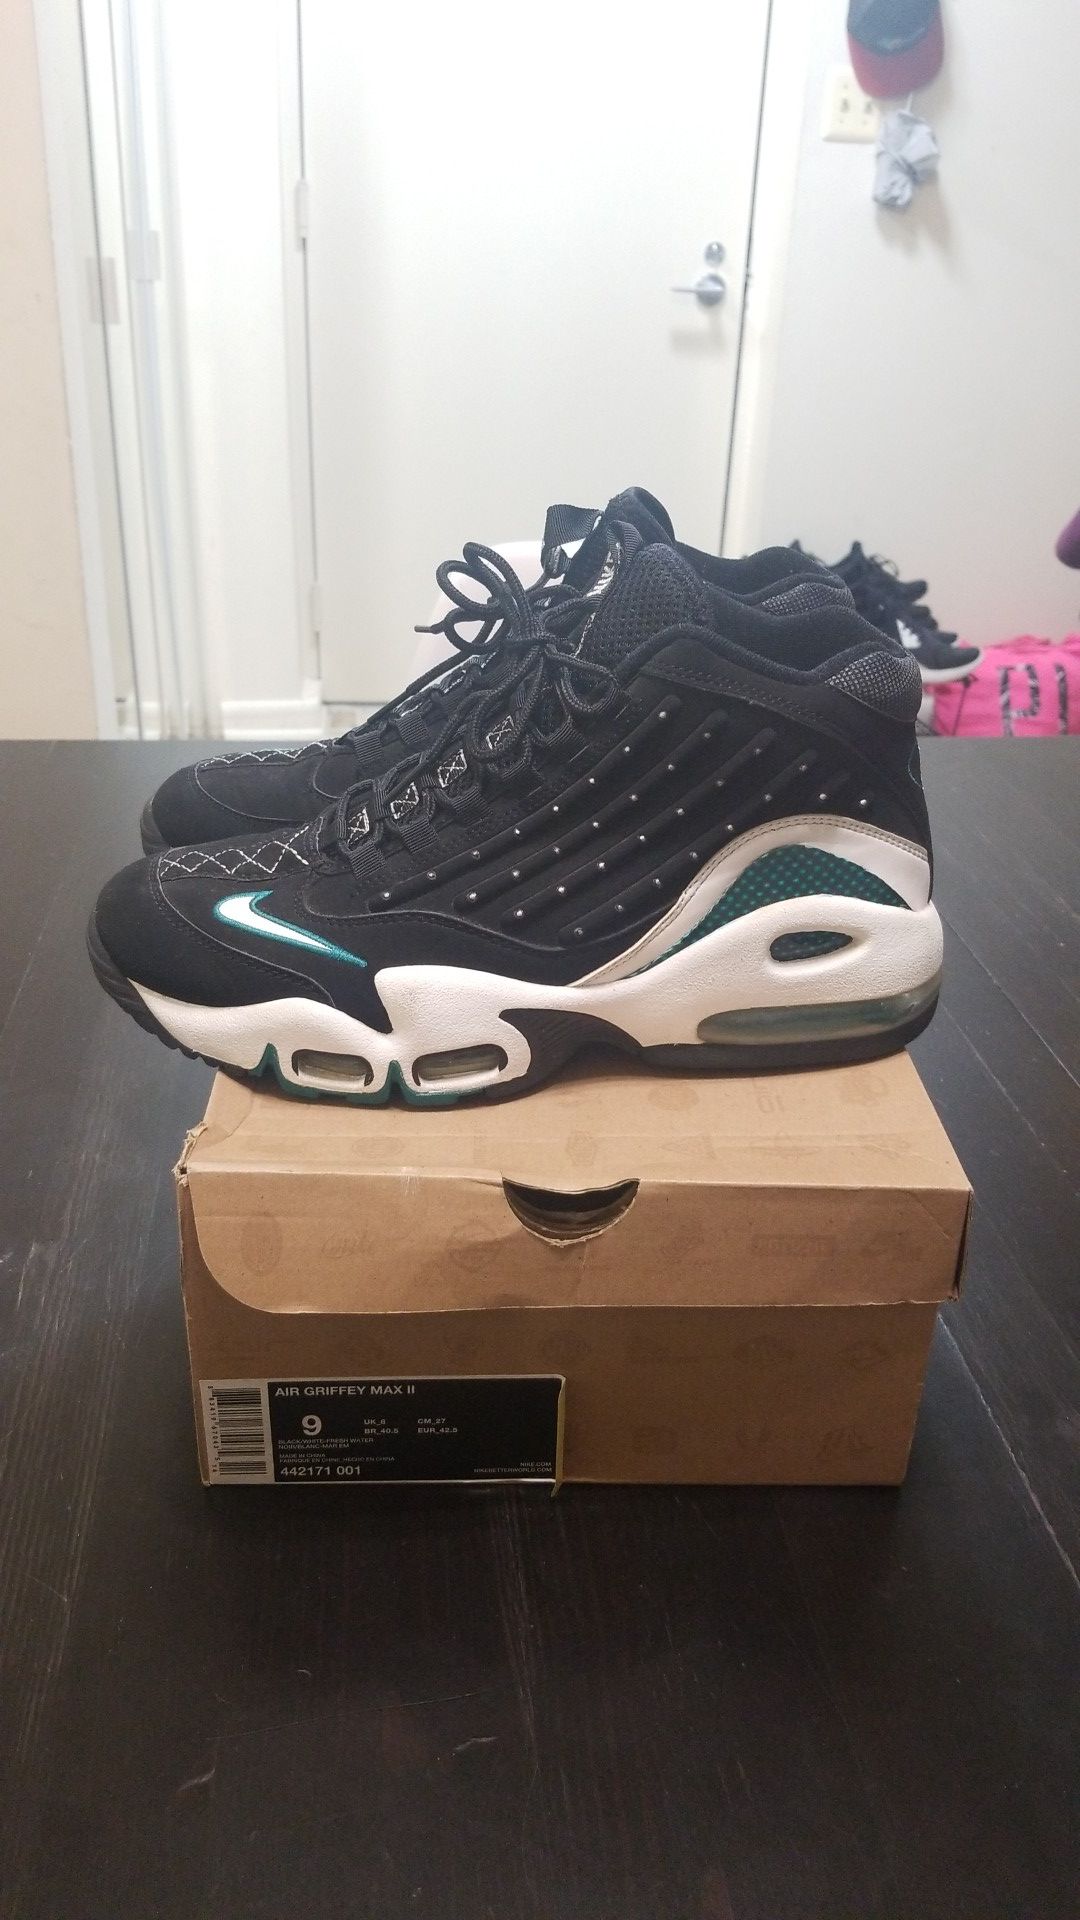 Nike air griffey 2 retro from 2010 size 9